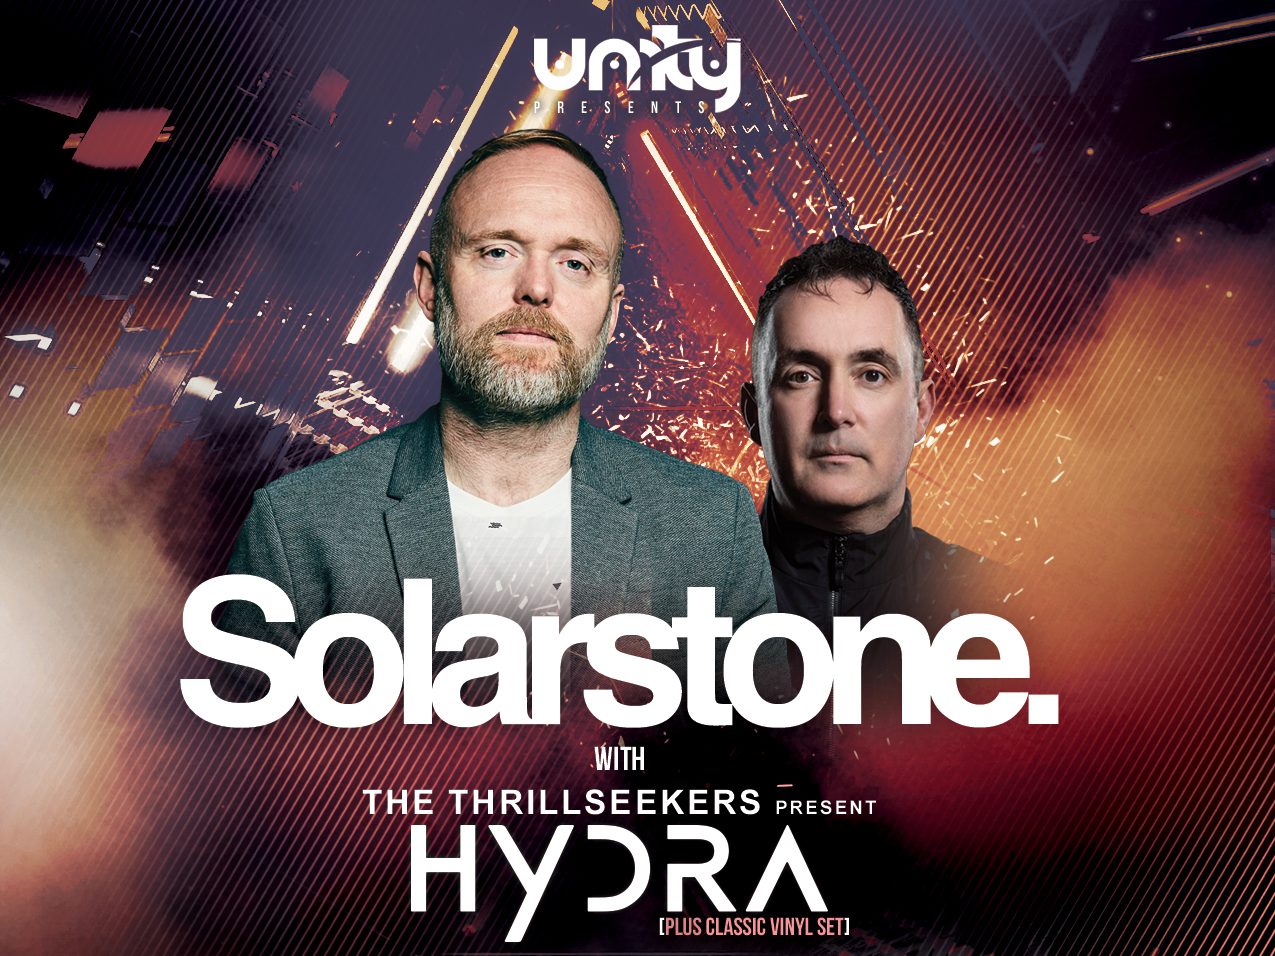 Solarstone and The Thrillseekers Presents Hydra at Misfits